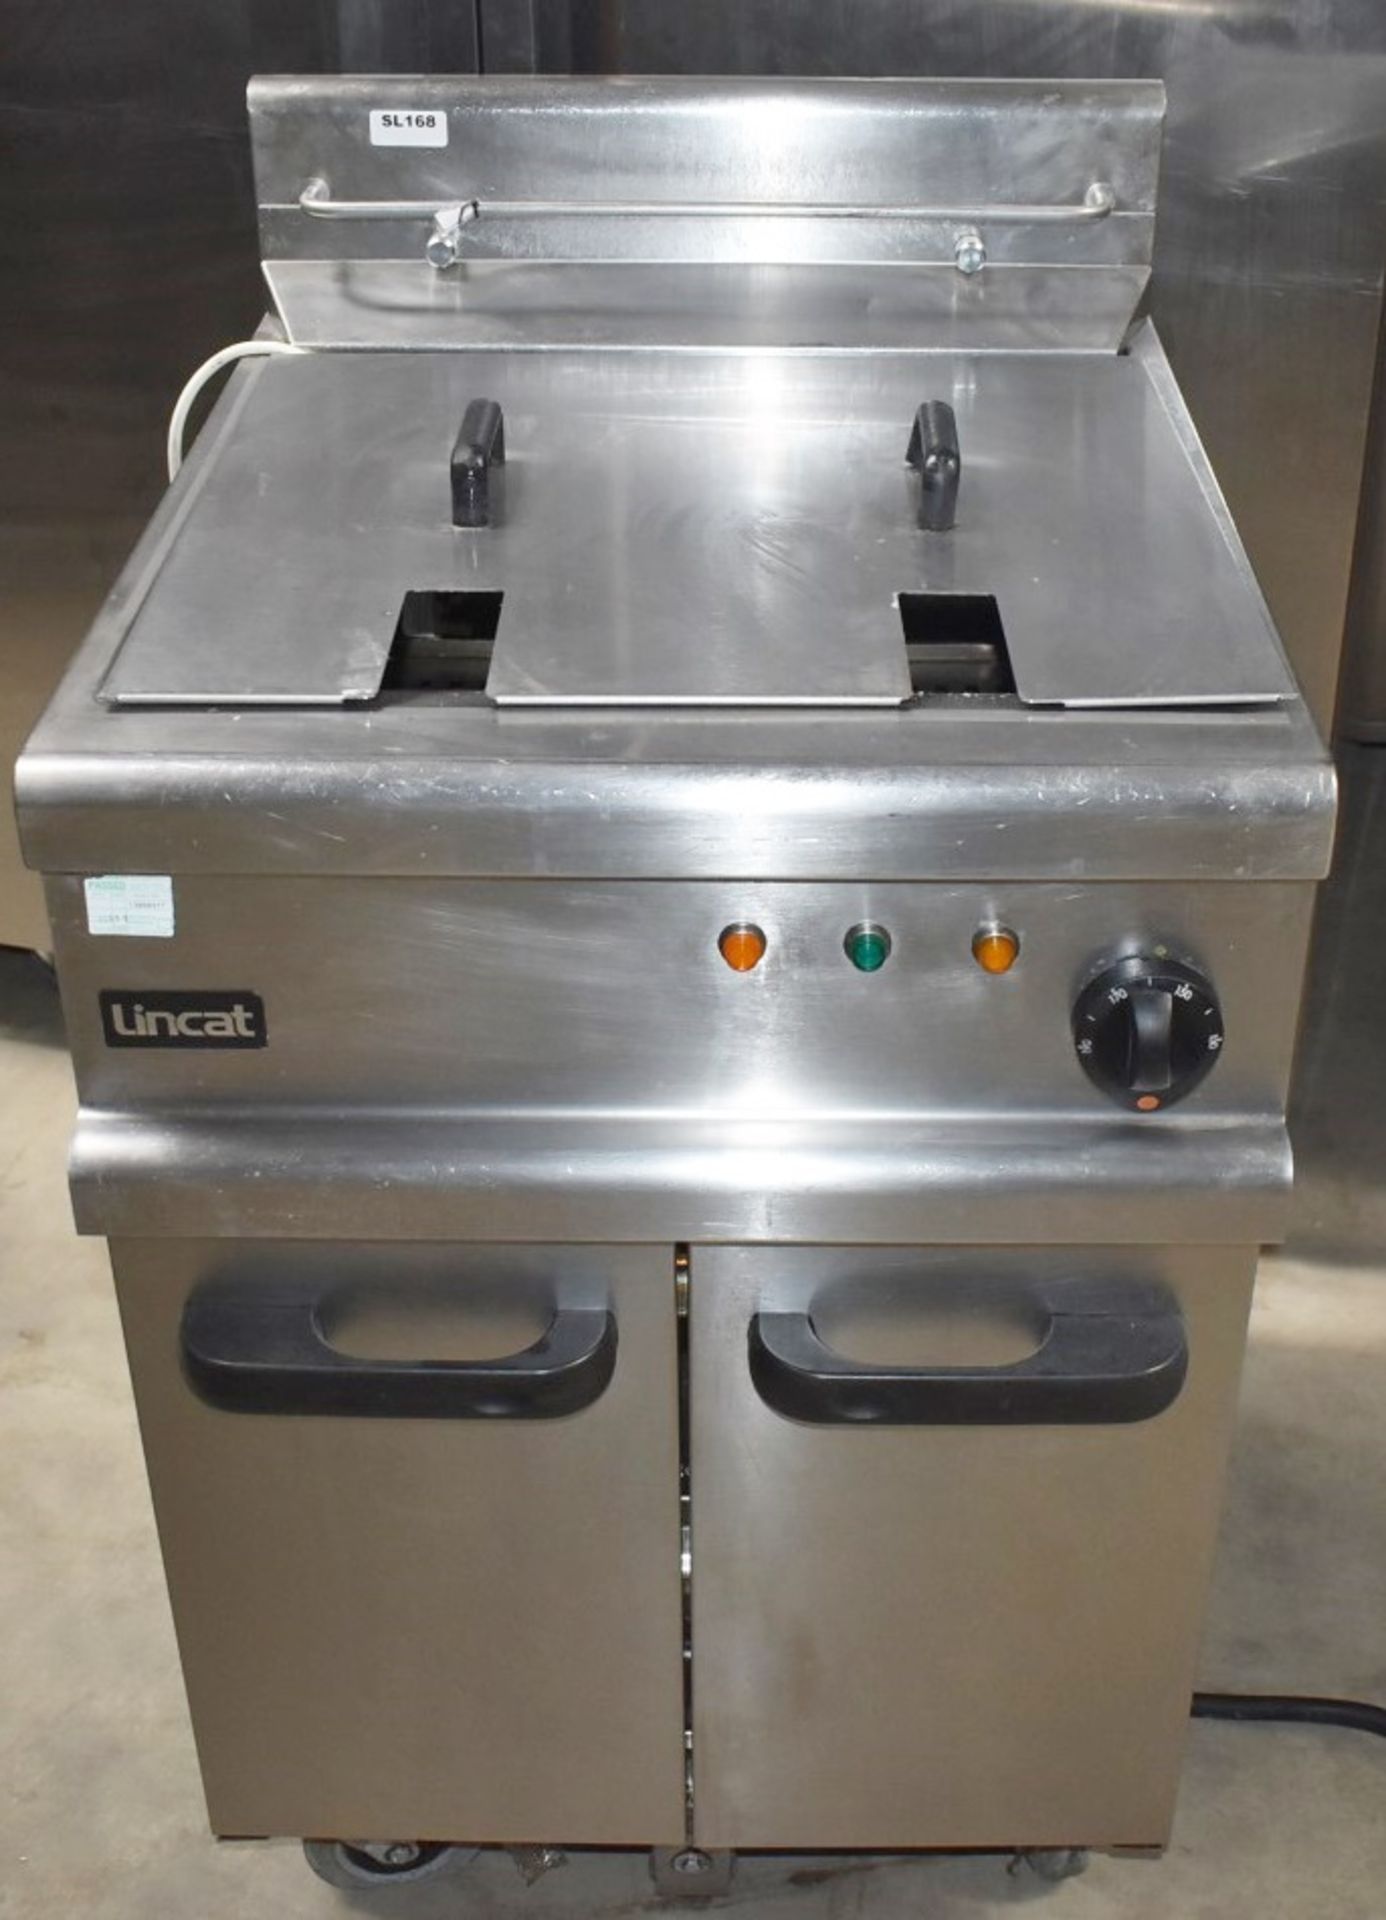 1 x Lincat Opus 700 Single Tank Electric Fryer With Built In Filtration - 3 Phase - Approx RRP £3, - Image 18 of 19